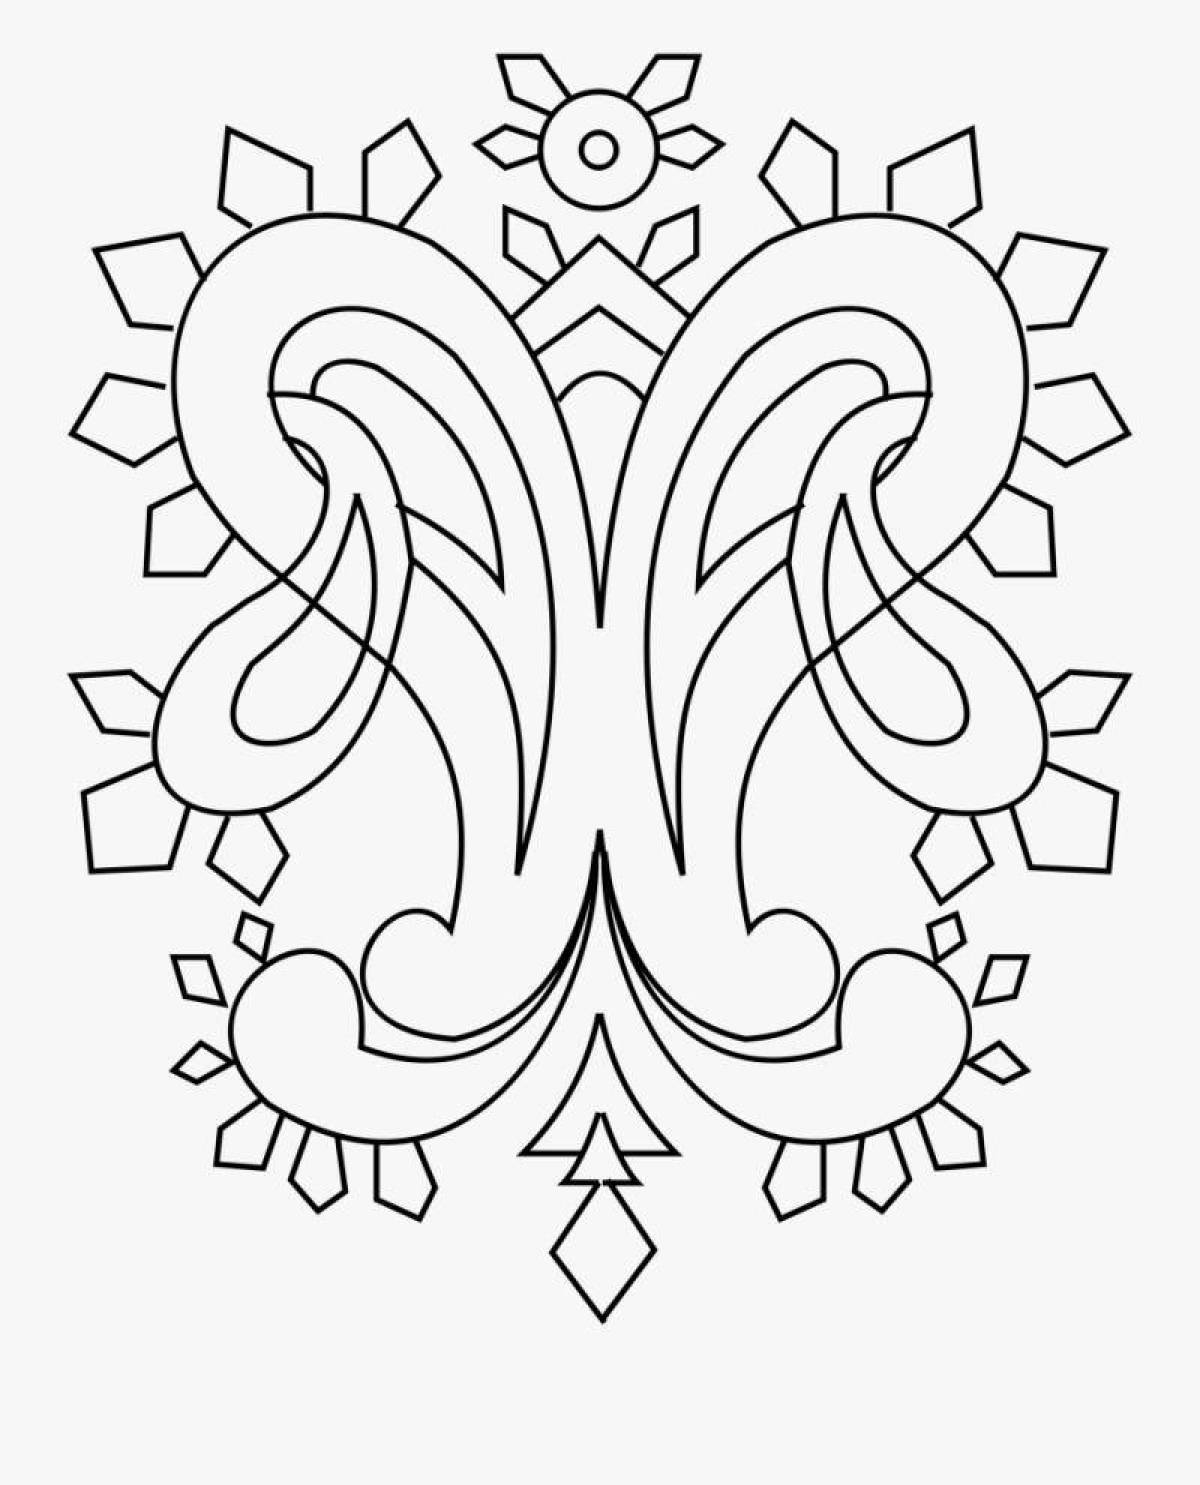 Glorious Tatar ornament coloring book for children